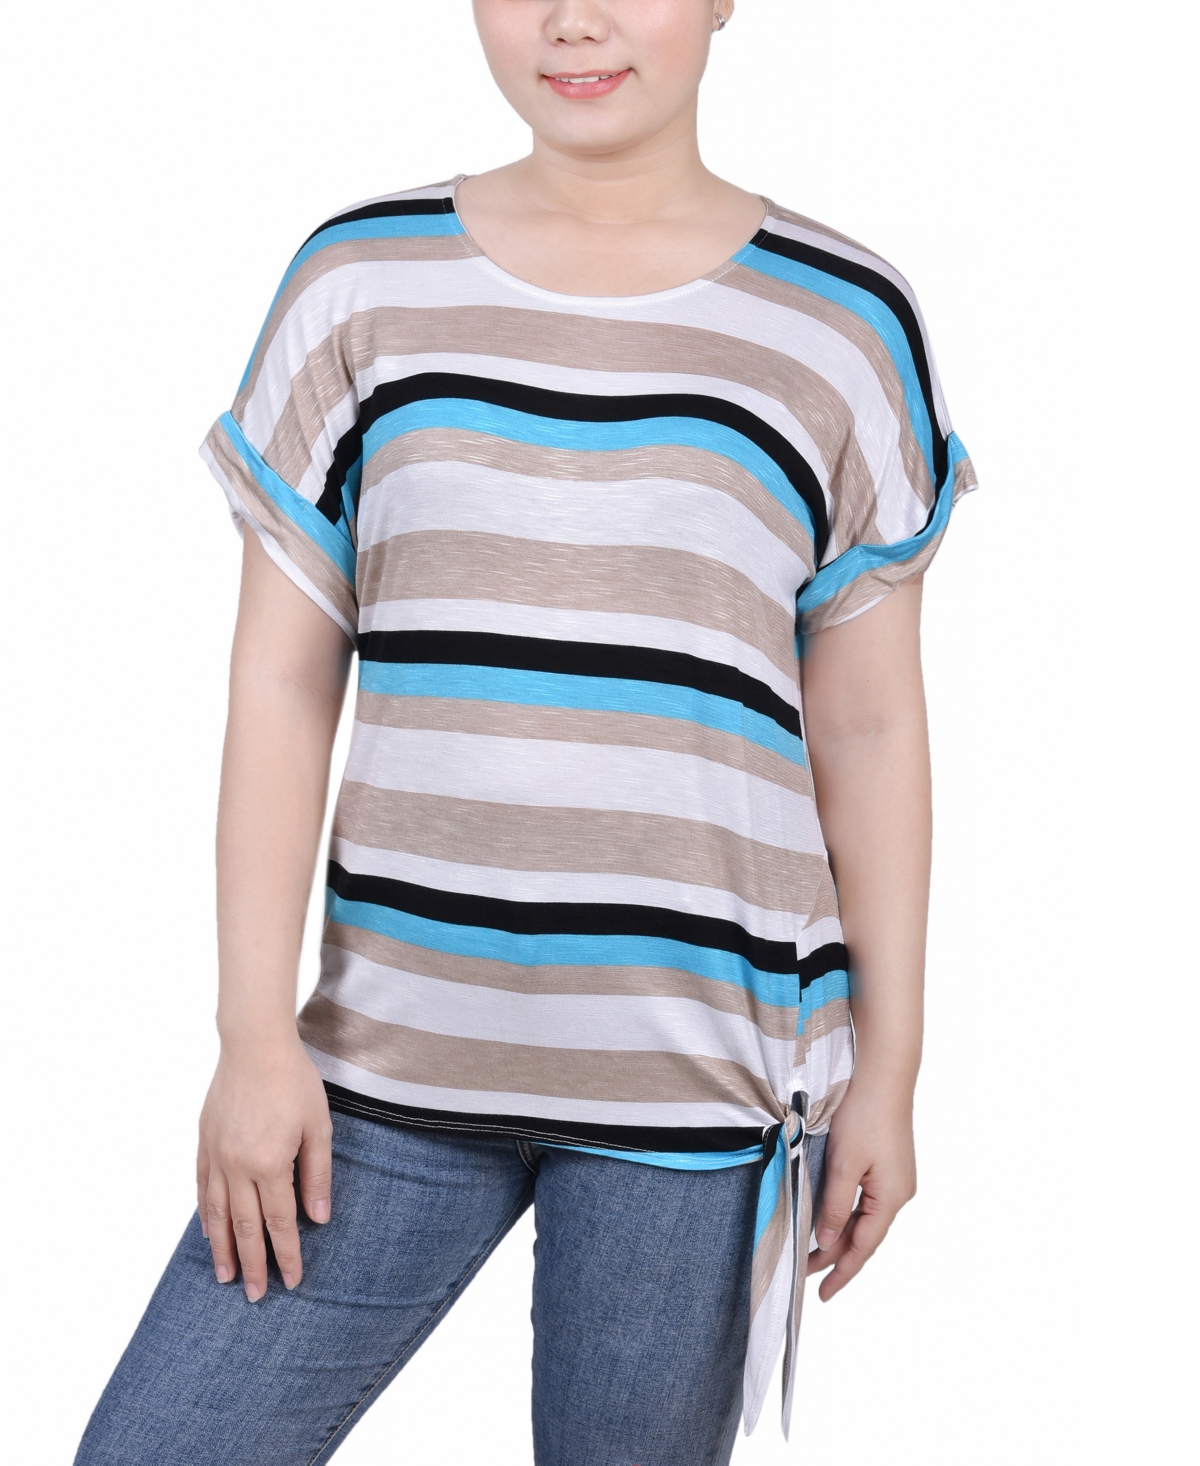 Petite Size Short Sleeve Tie Front Top - Turquoise Multi Stripe